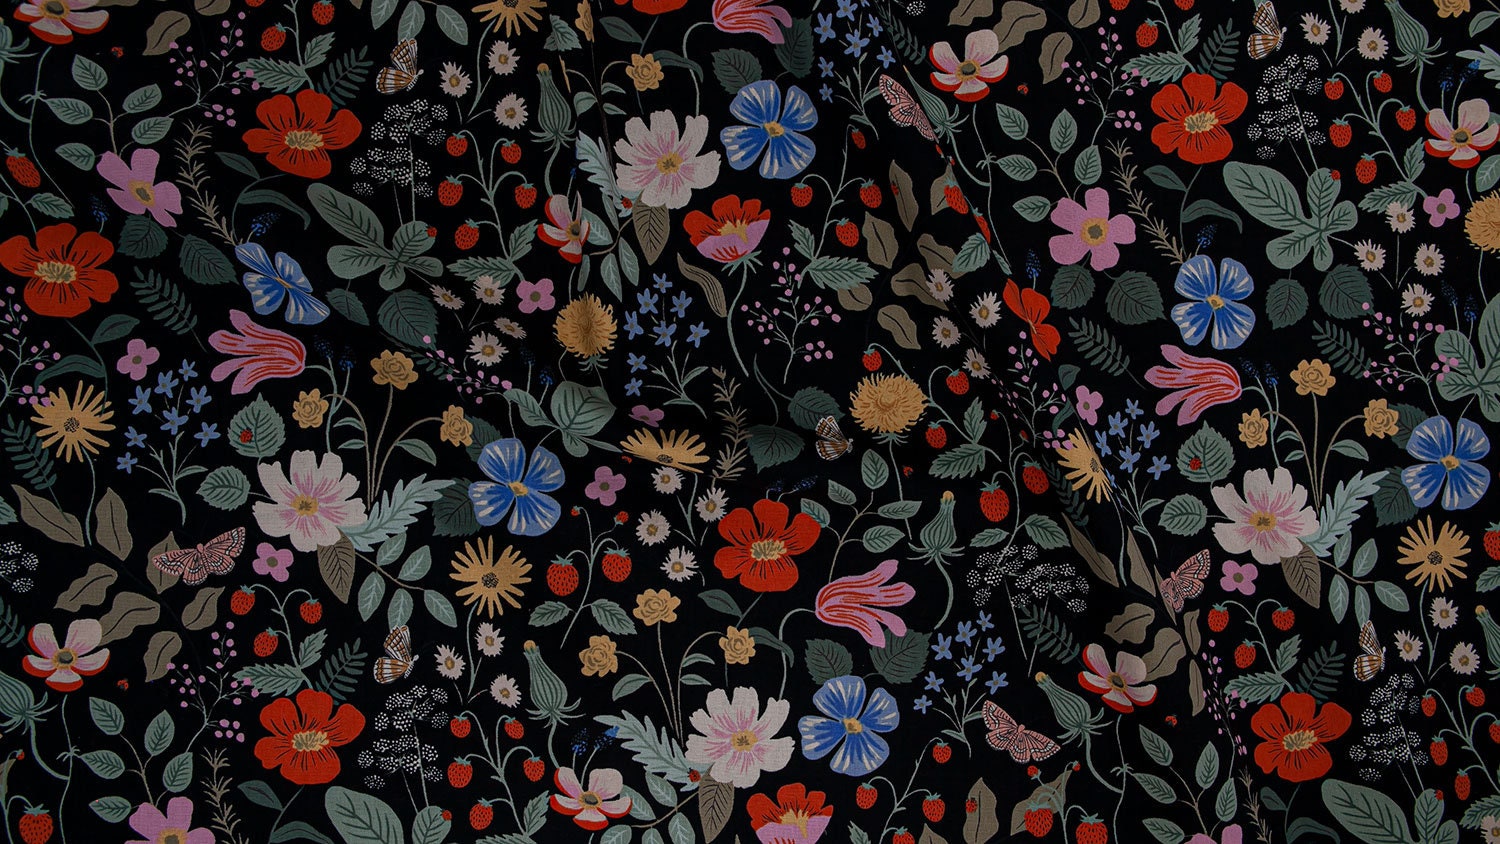 Wildflower Field-black CANVAS Fabric, Rifle Paper Co. Cotton Linen Blend,  Meadow Collection, Upholstery Fabric, Cottonsteel Fabrics 